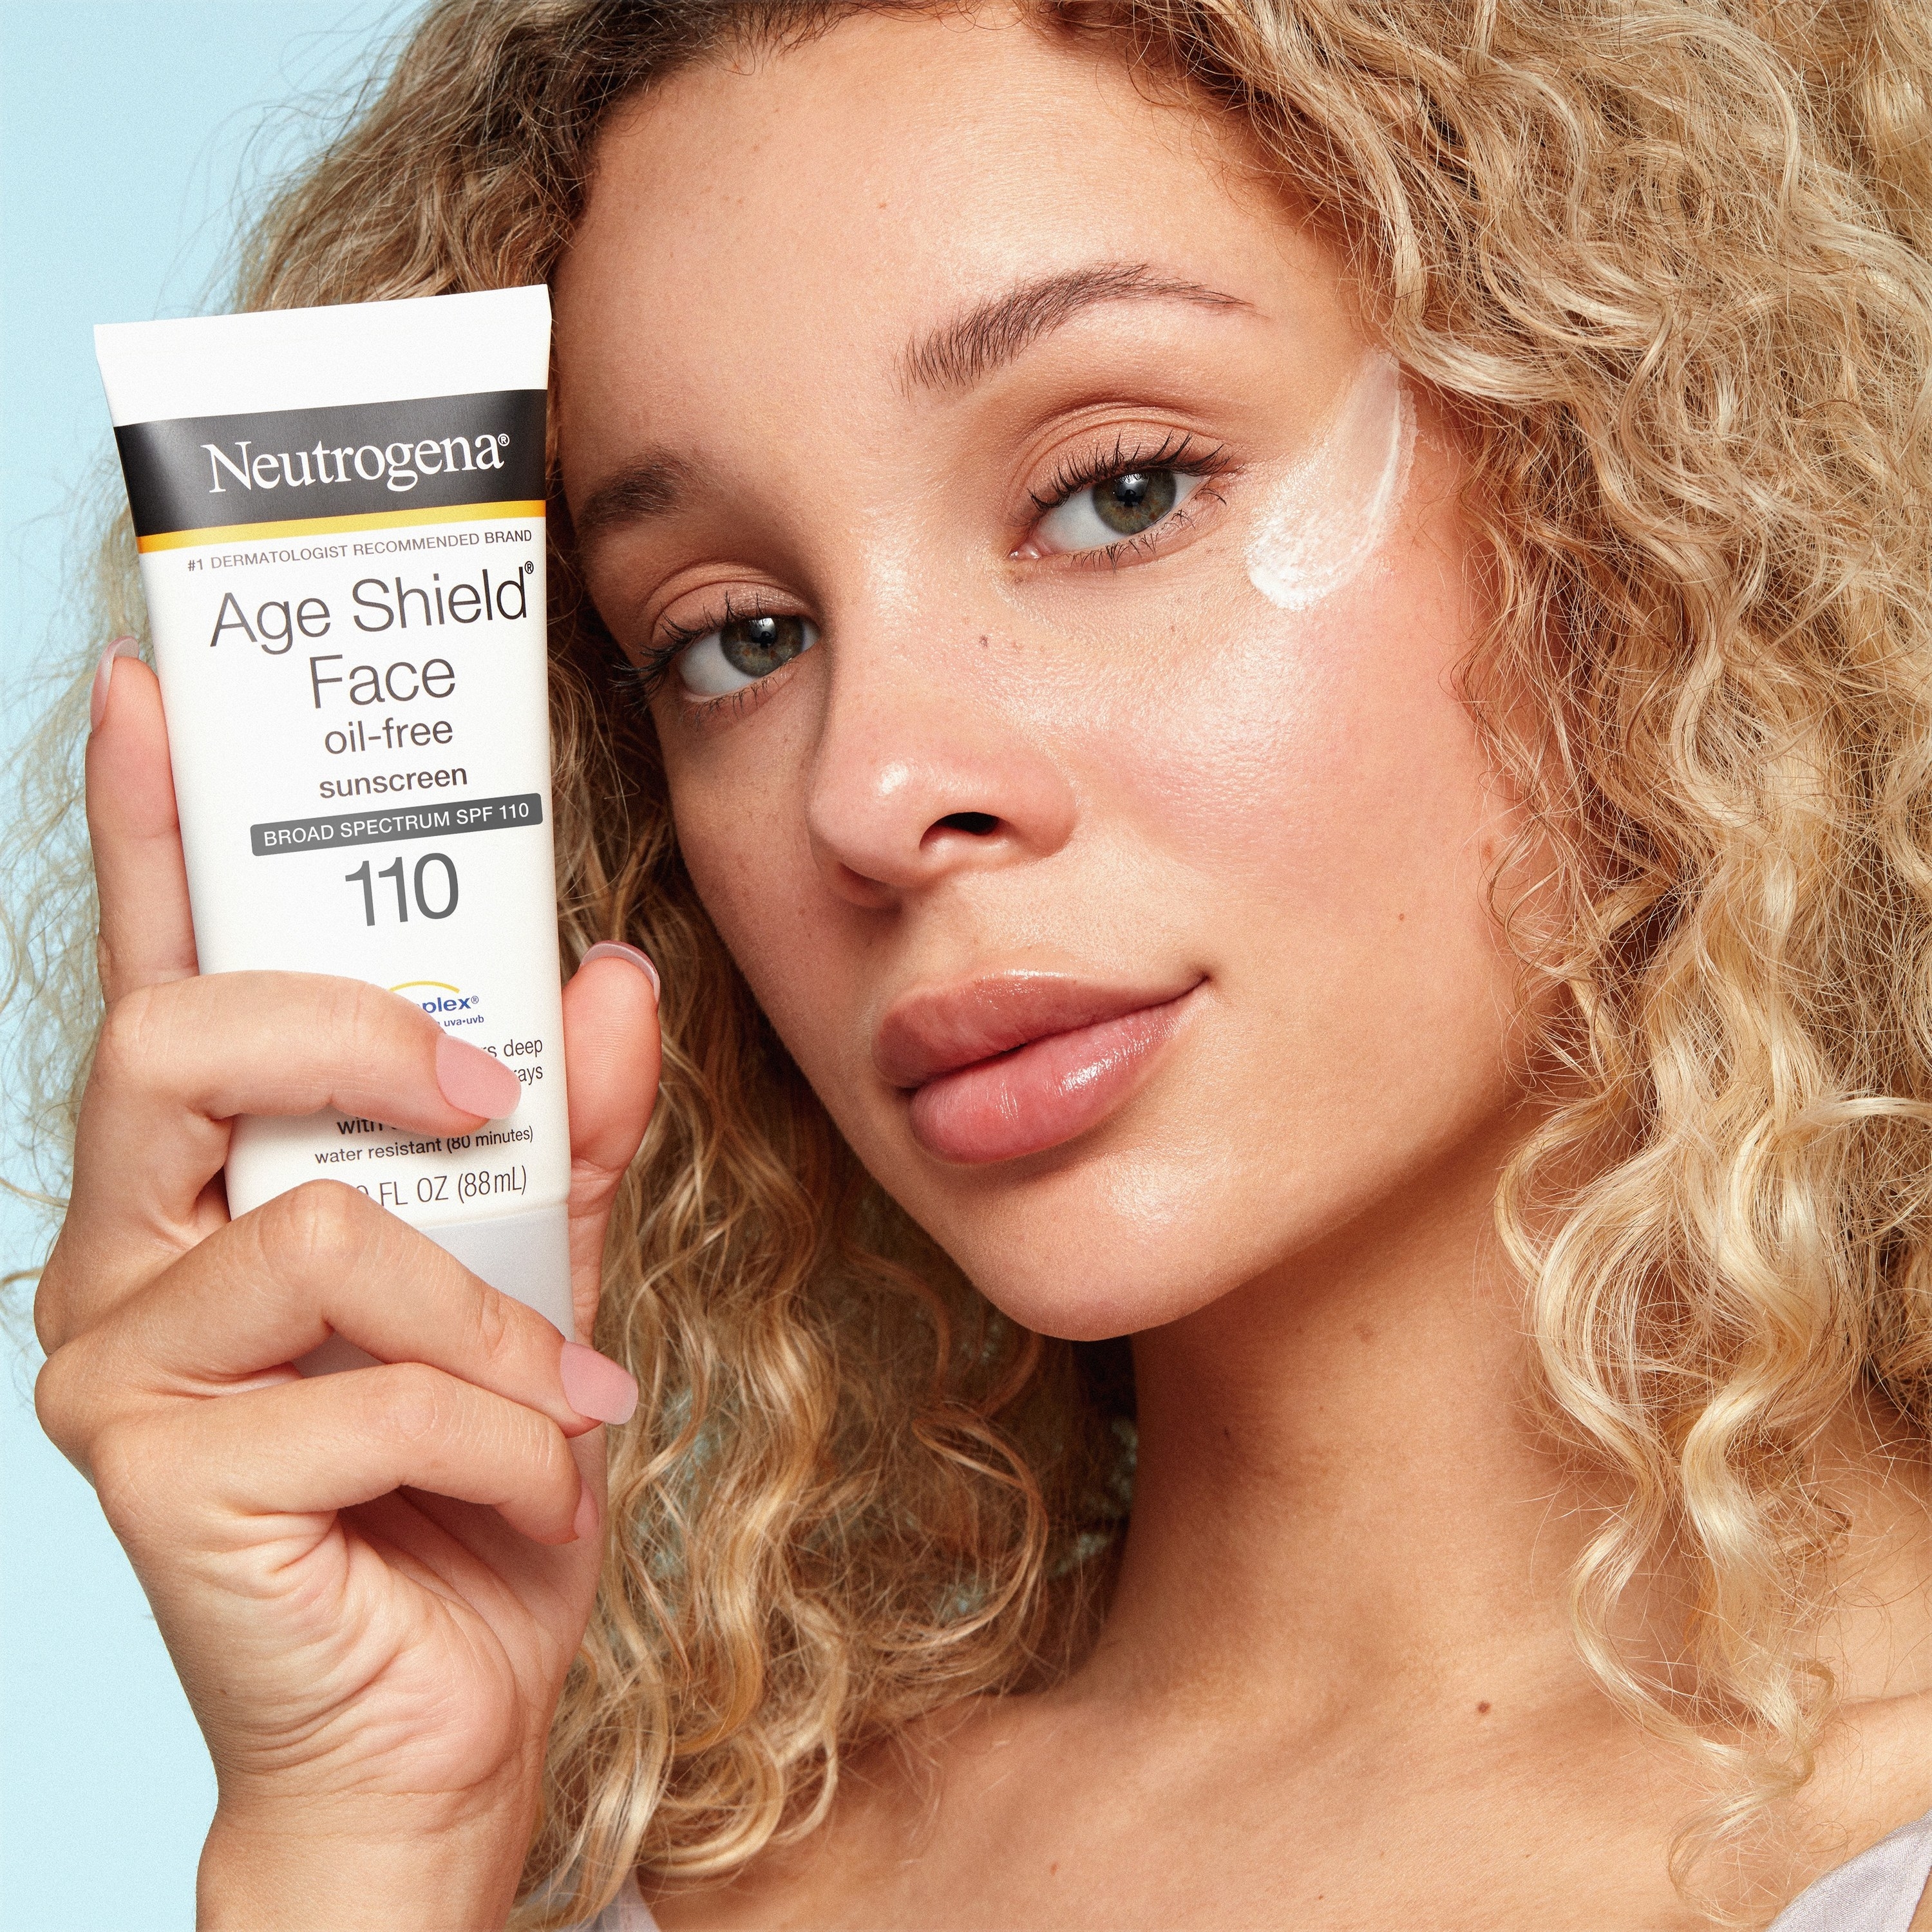 A model holding the sunscreen tube